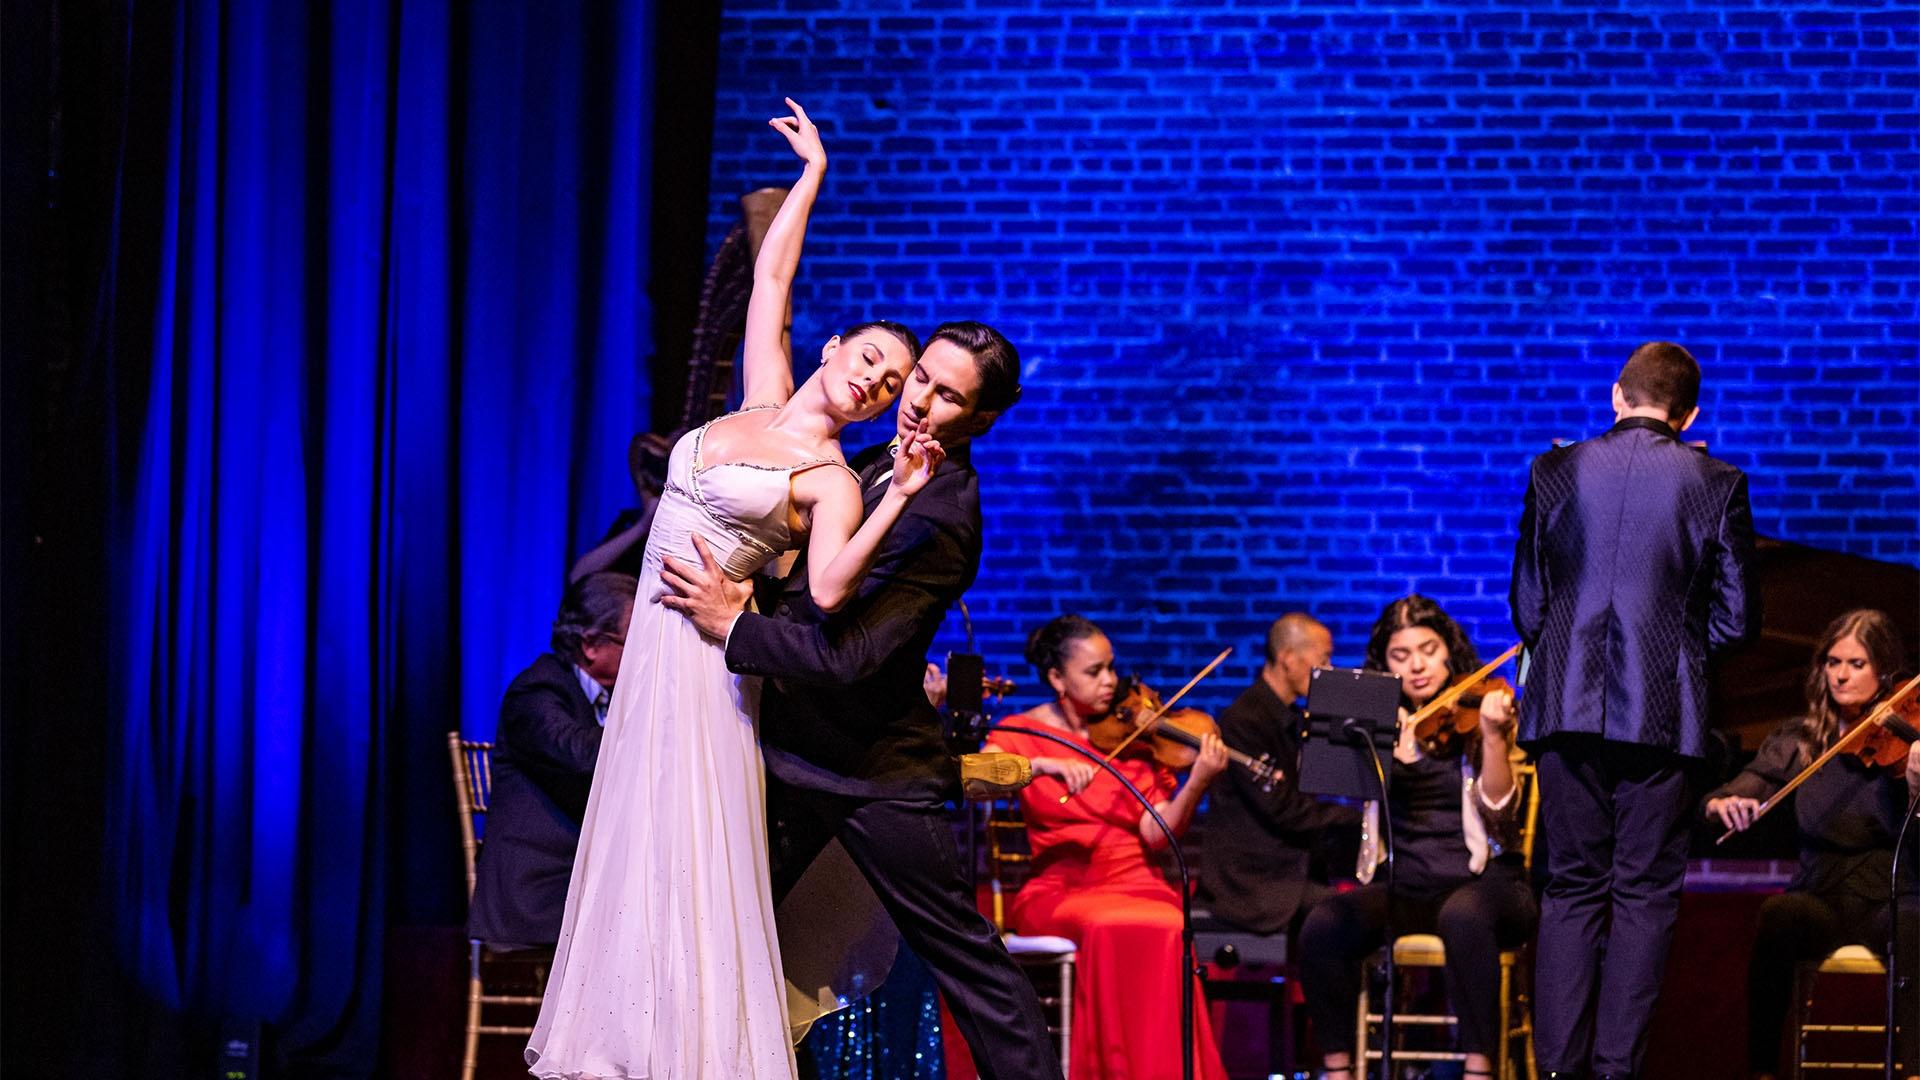 Tiler Peck and Roman Mejia performing "I'll be Seeing You" at Strand Theater in Marietta, Georgia